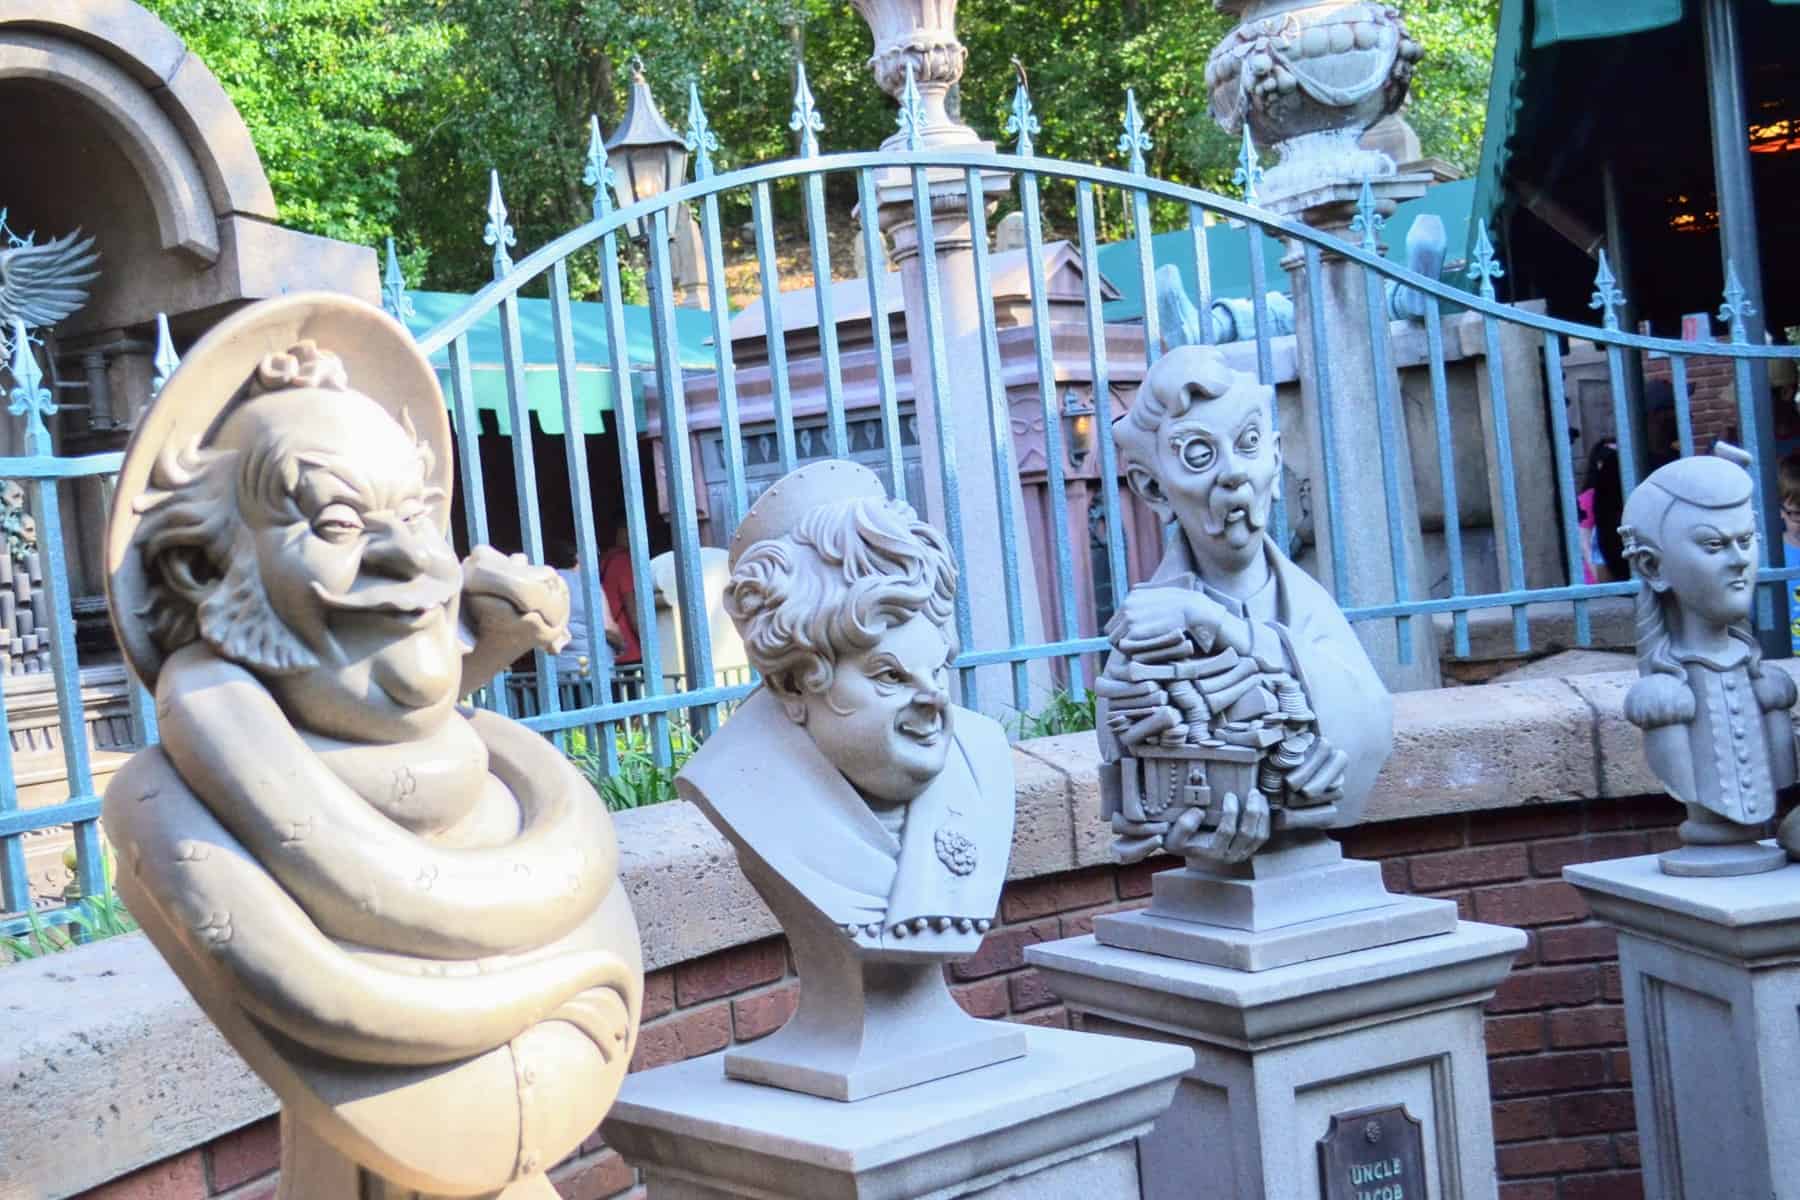 Things that might scare little ones at Disney World